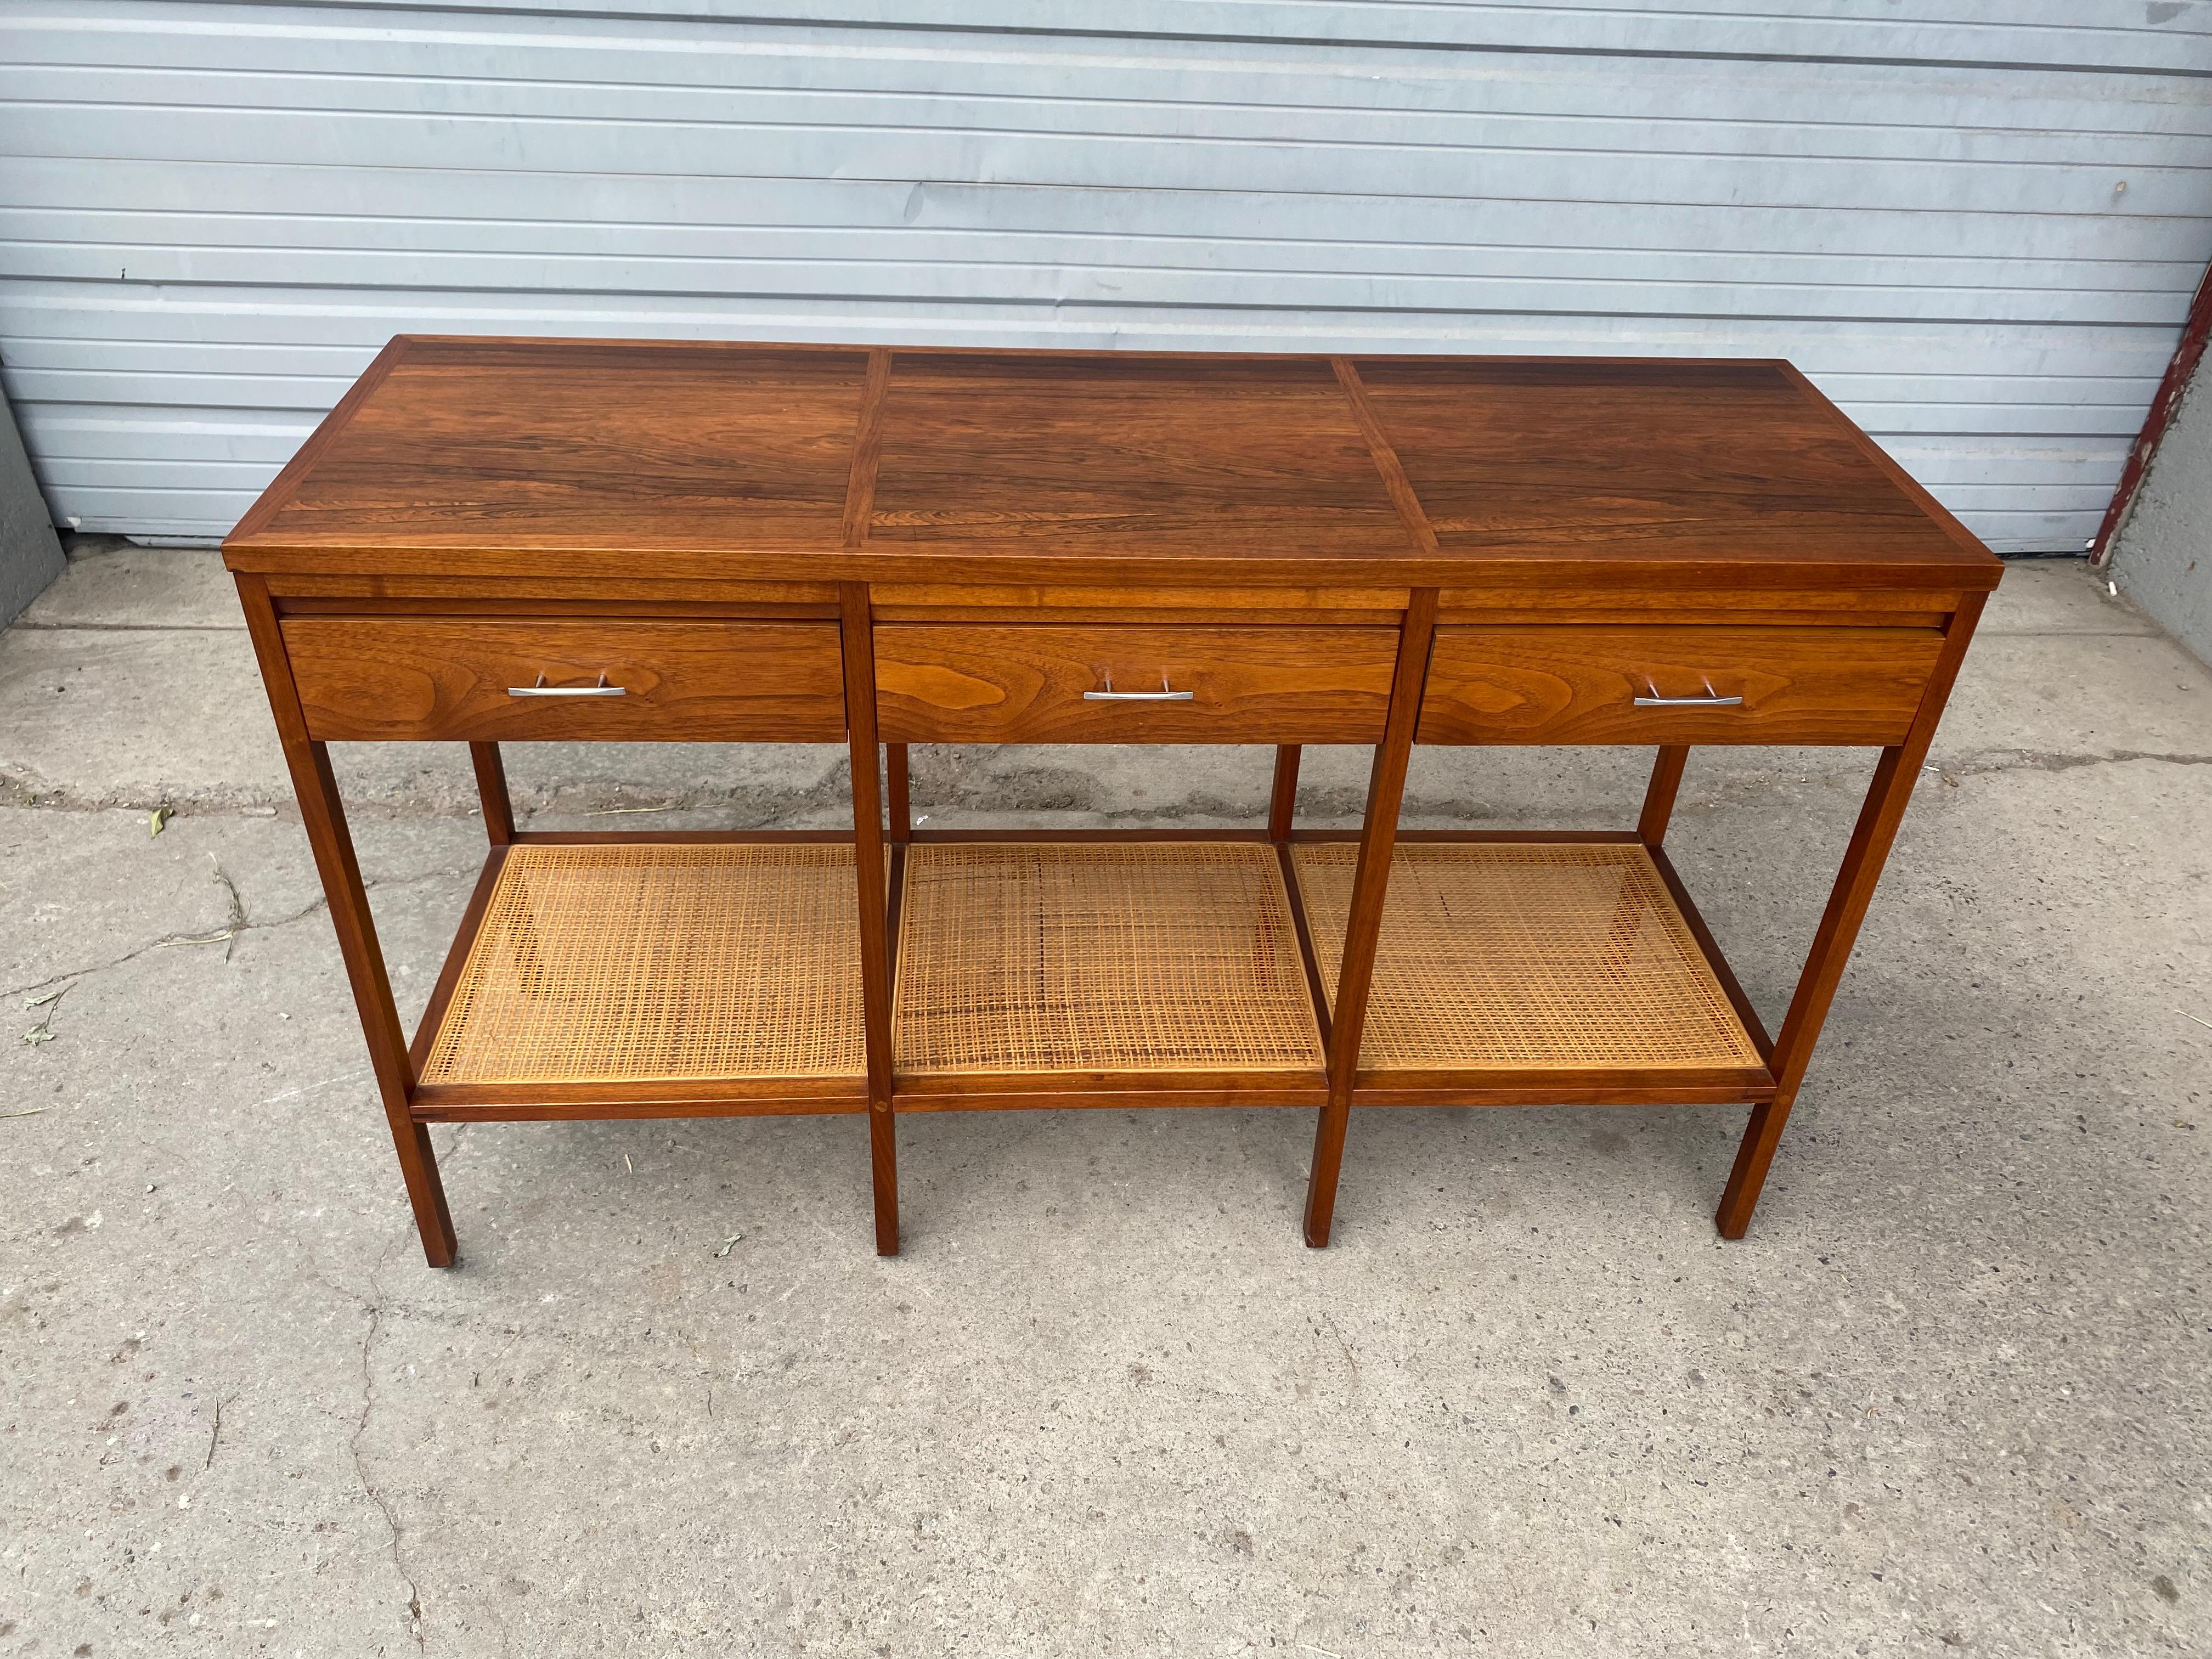 Mid-Century Modern Stunning Rosewood and Cane Console Table, Paul McCobb for Lane / Delineator